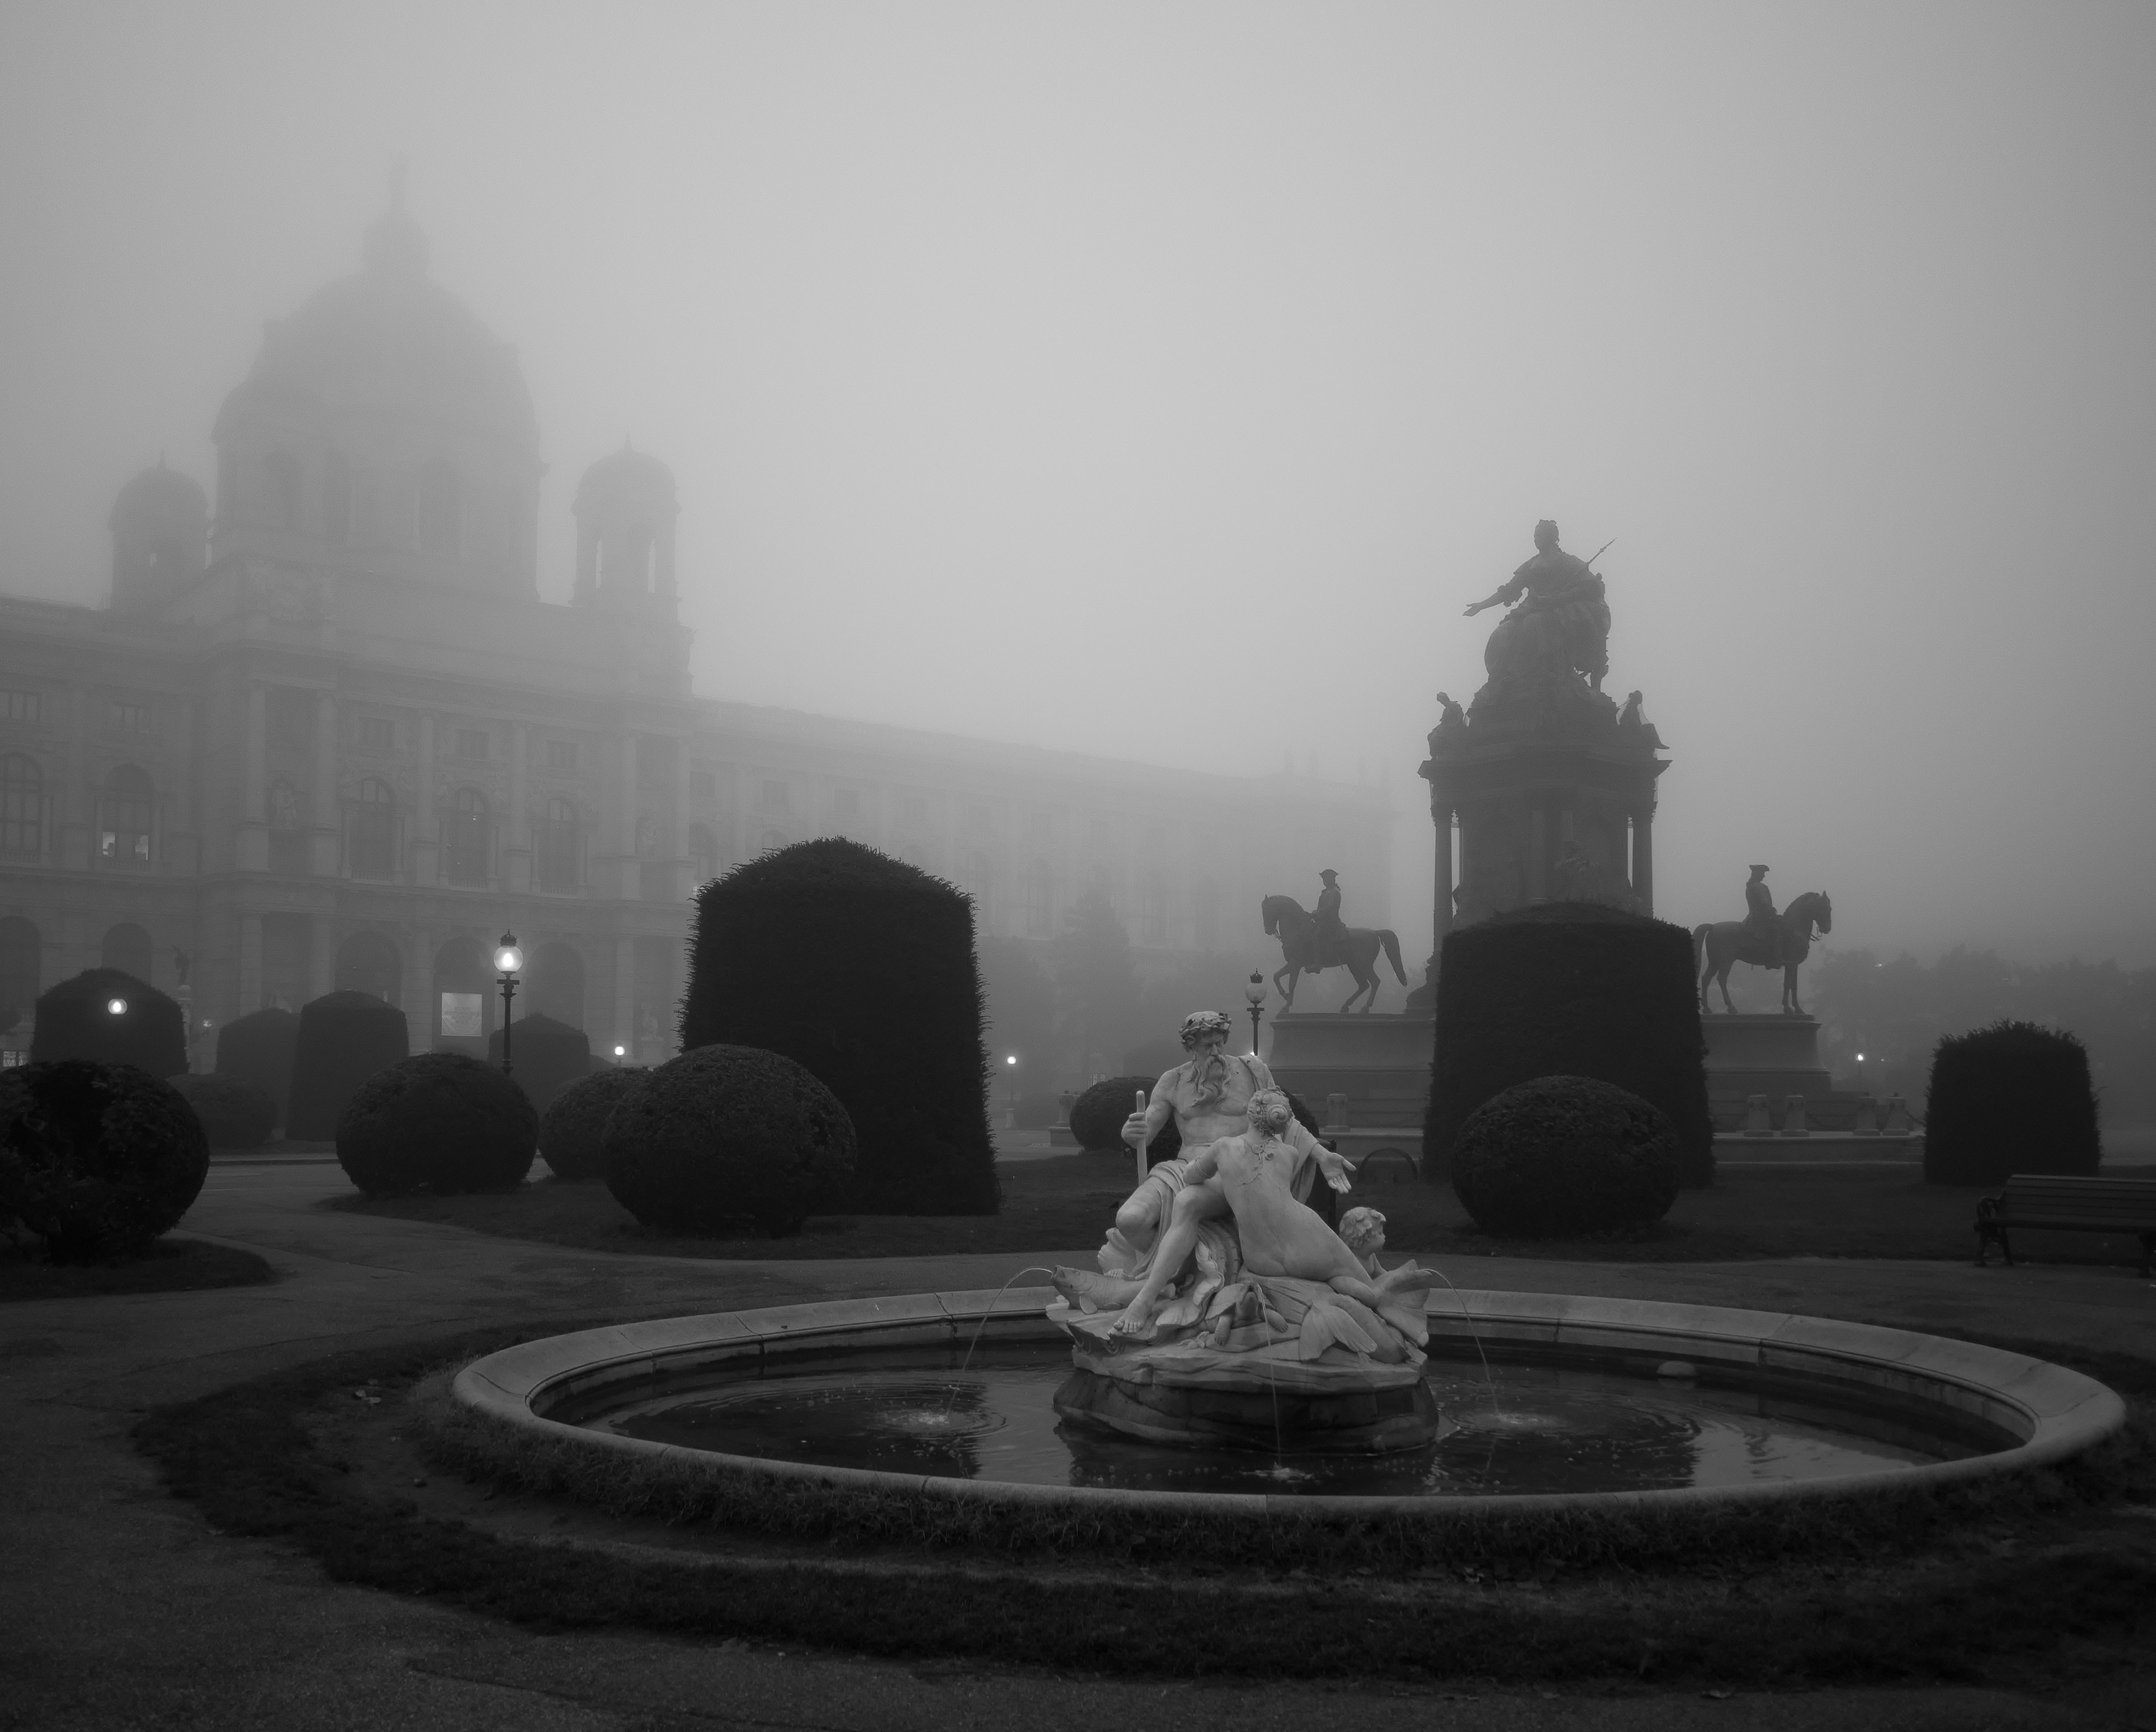 Two people statue over fog photo